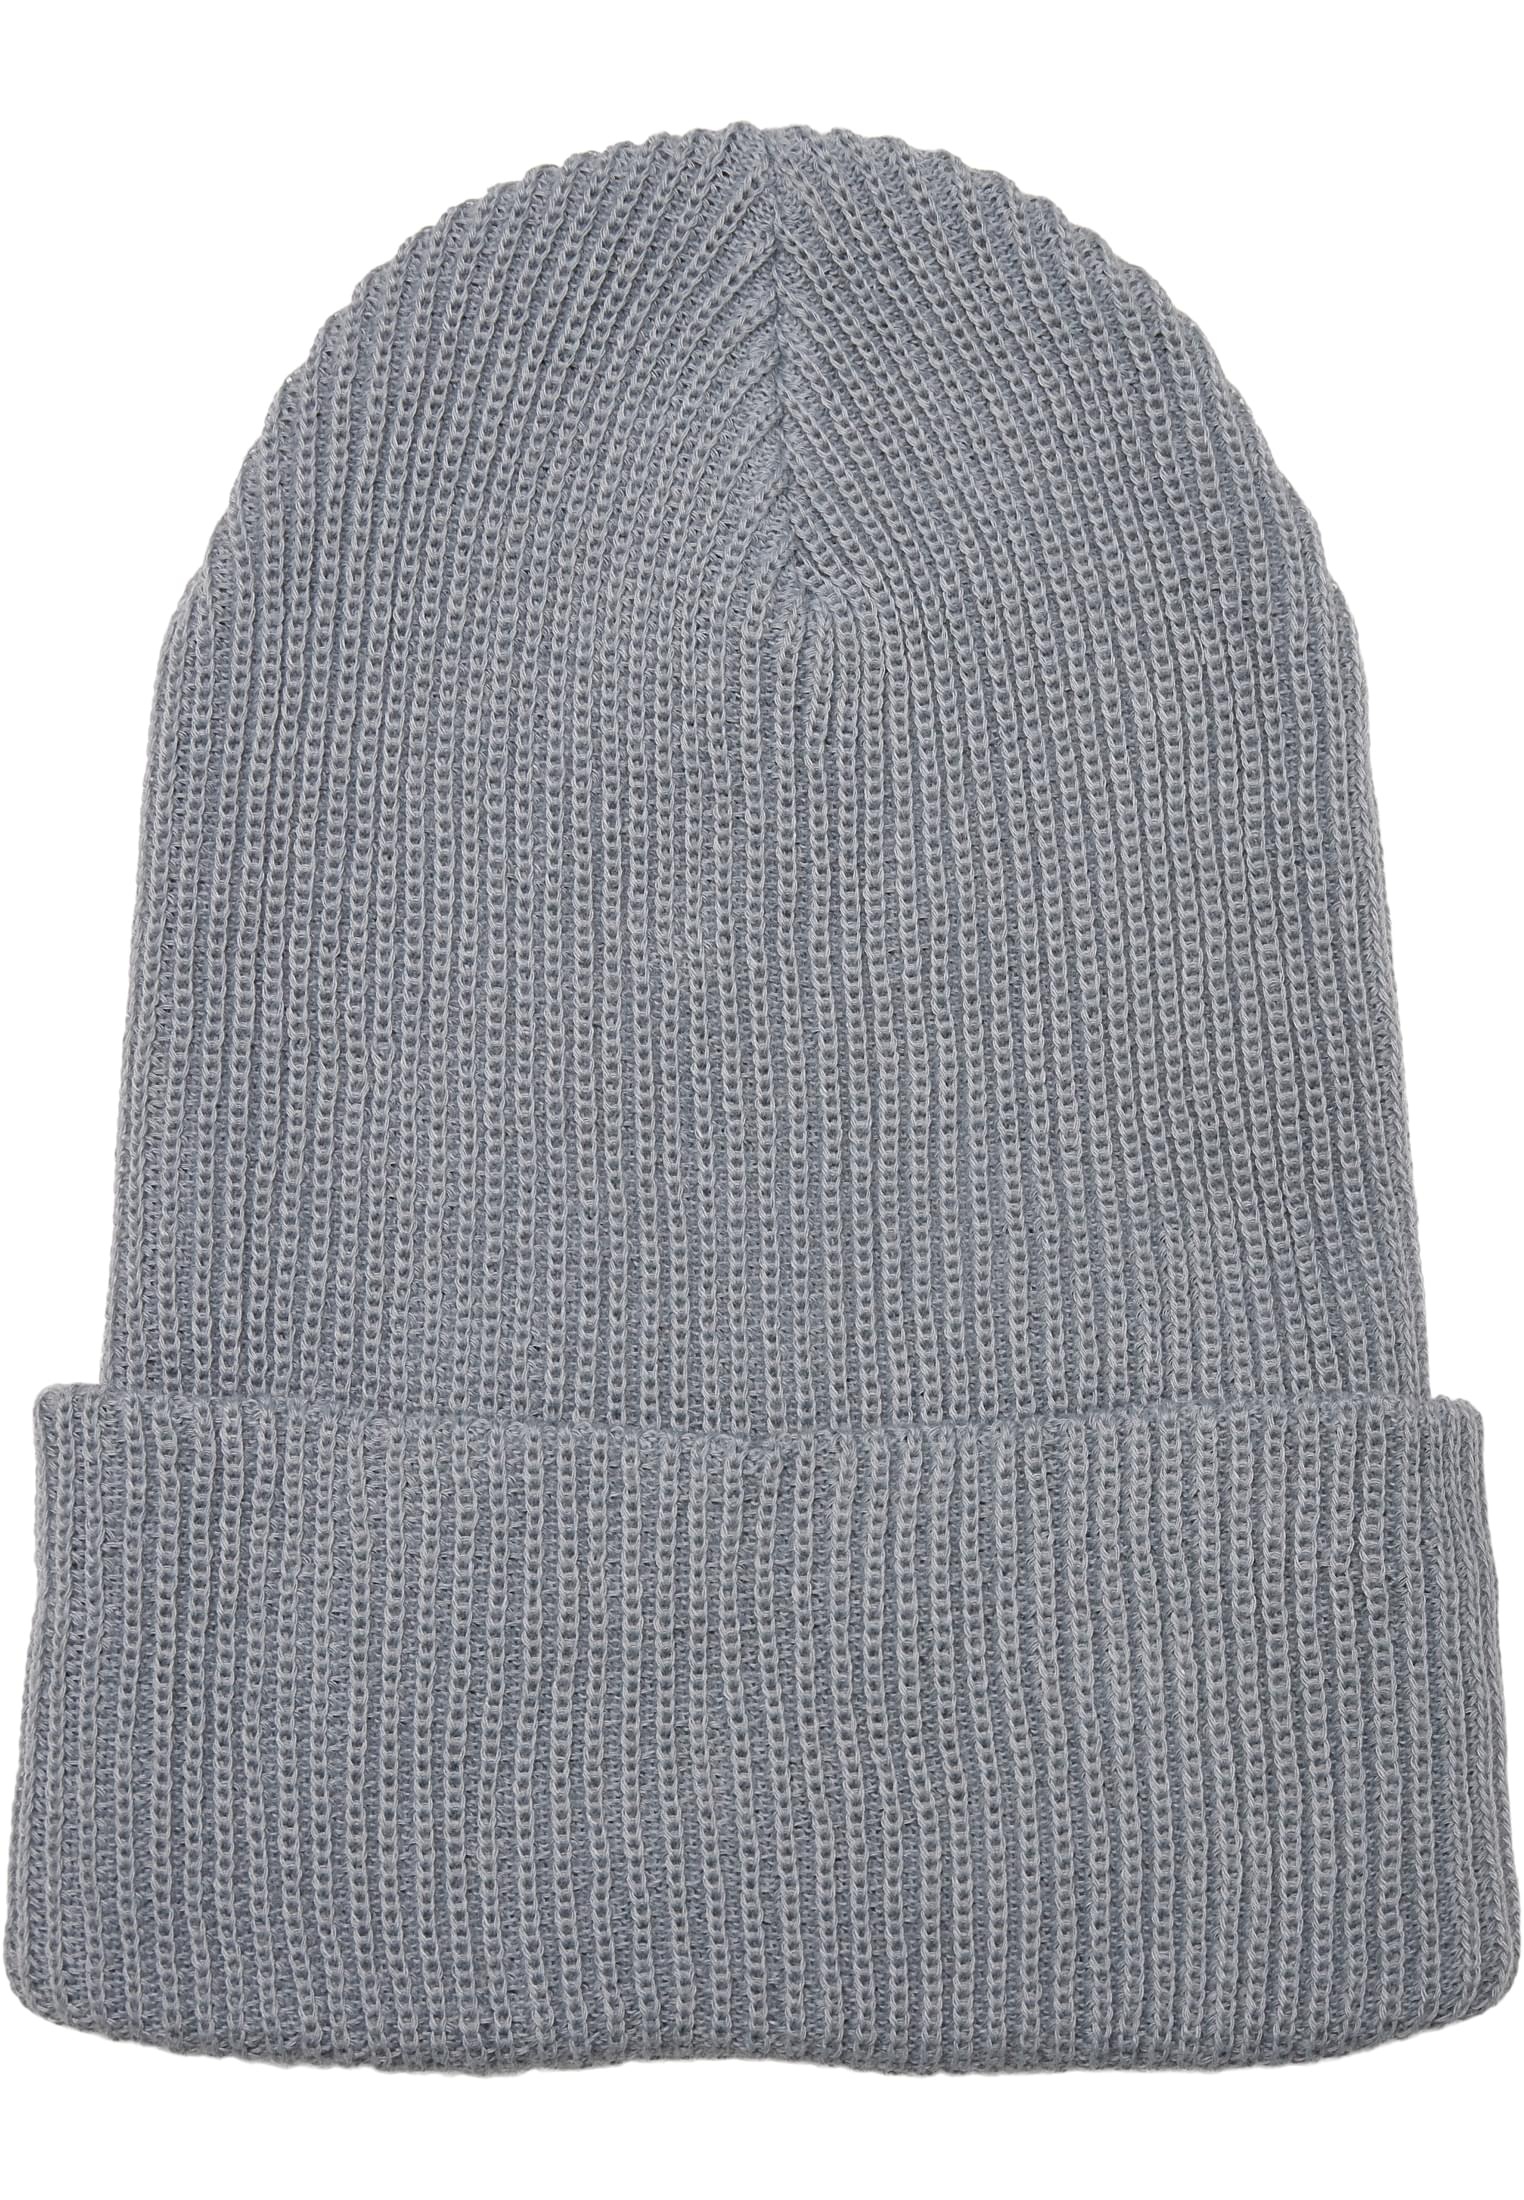 Beanie »Flexfit Accessoires Recycled Yarn Ribbed Knit Beanie«, (1 St.)